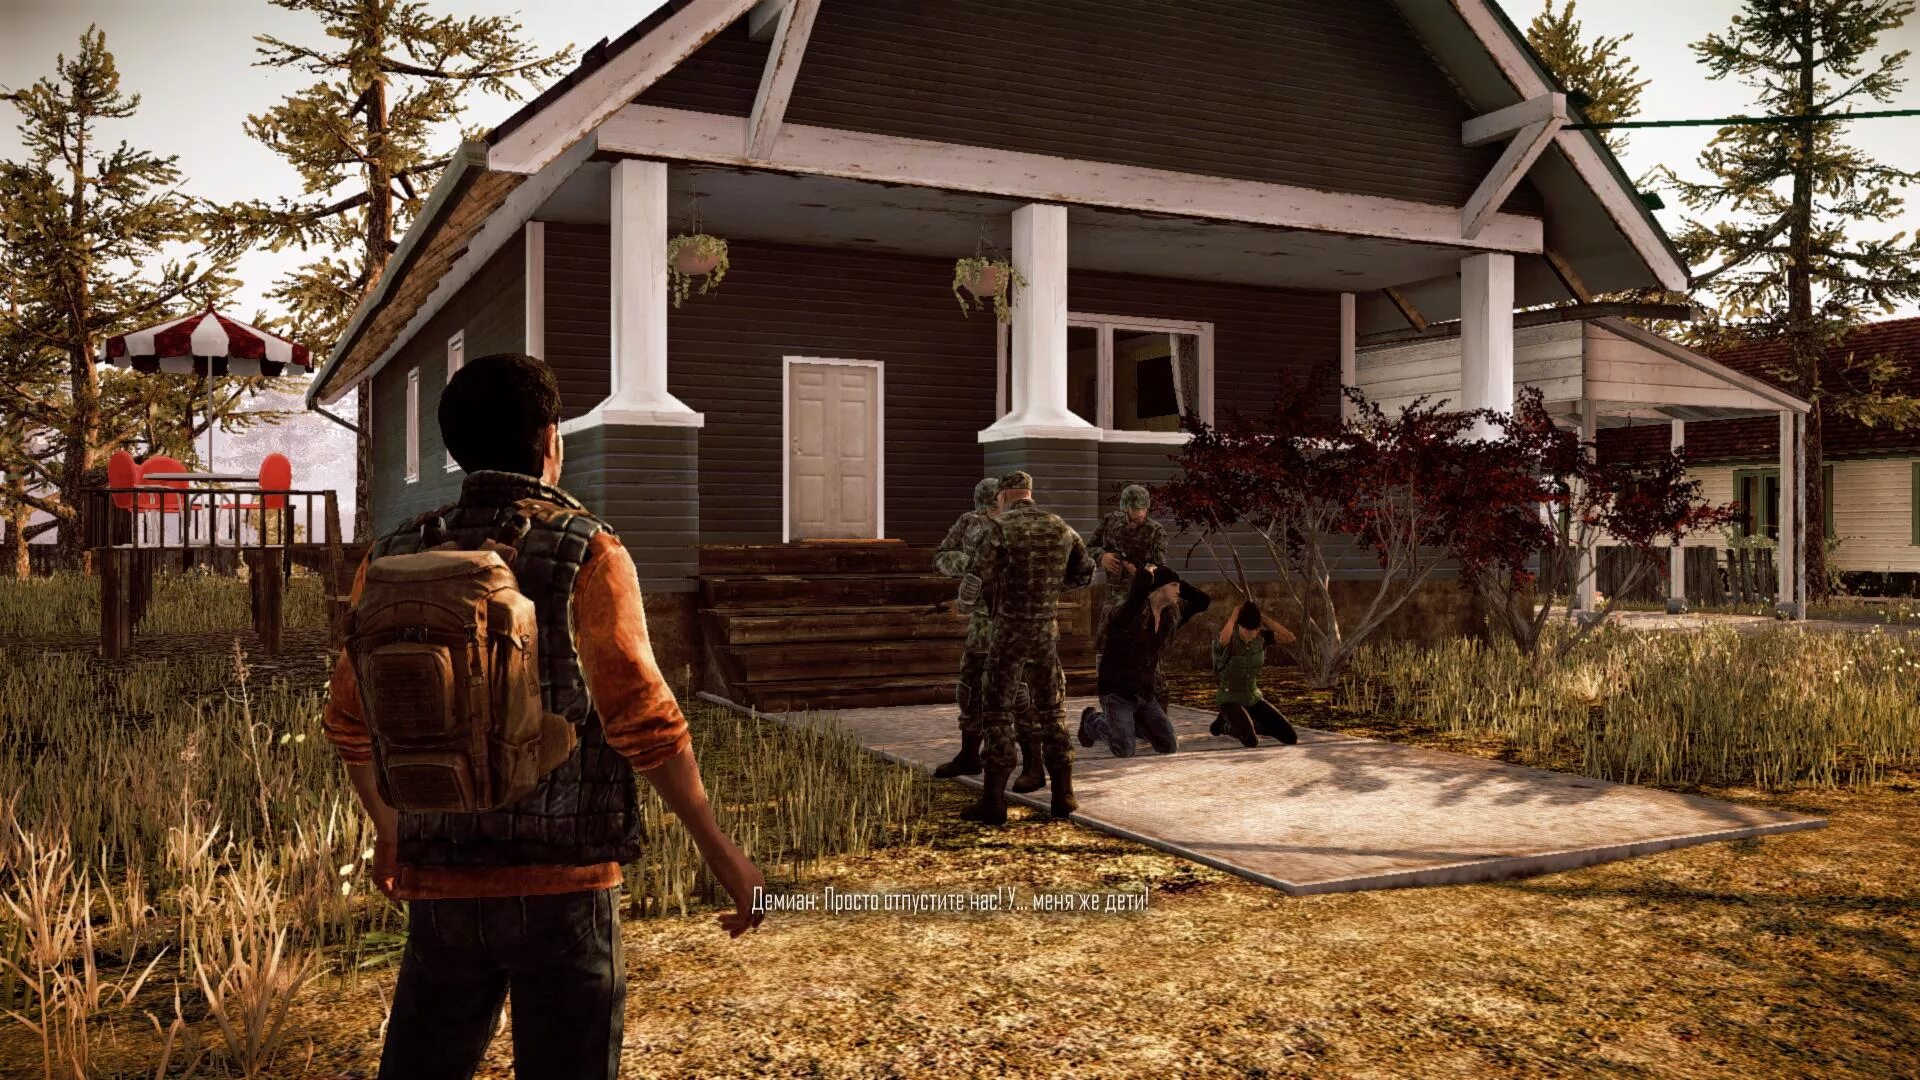 State of Decay. State of Decay 1. Игра State of Decay. Игра State of Decay 2. Кооперативы с открытым миром